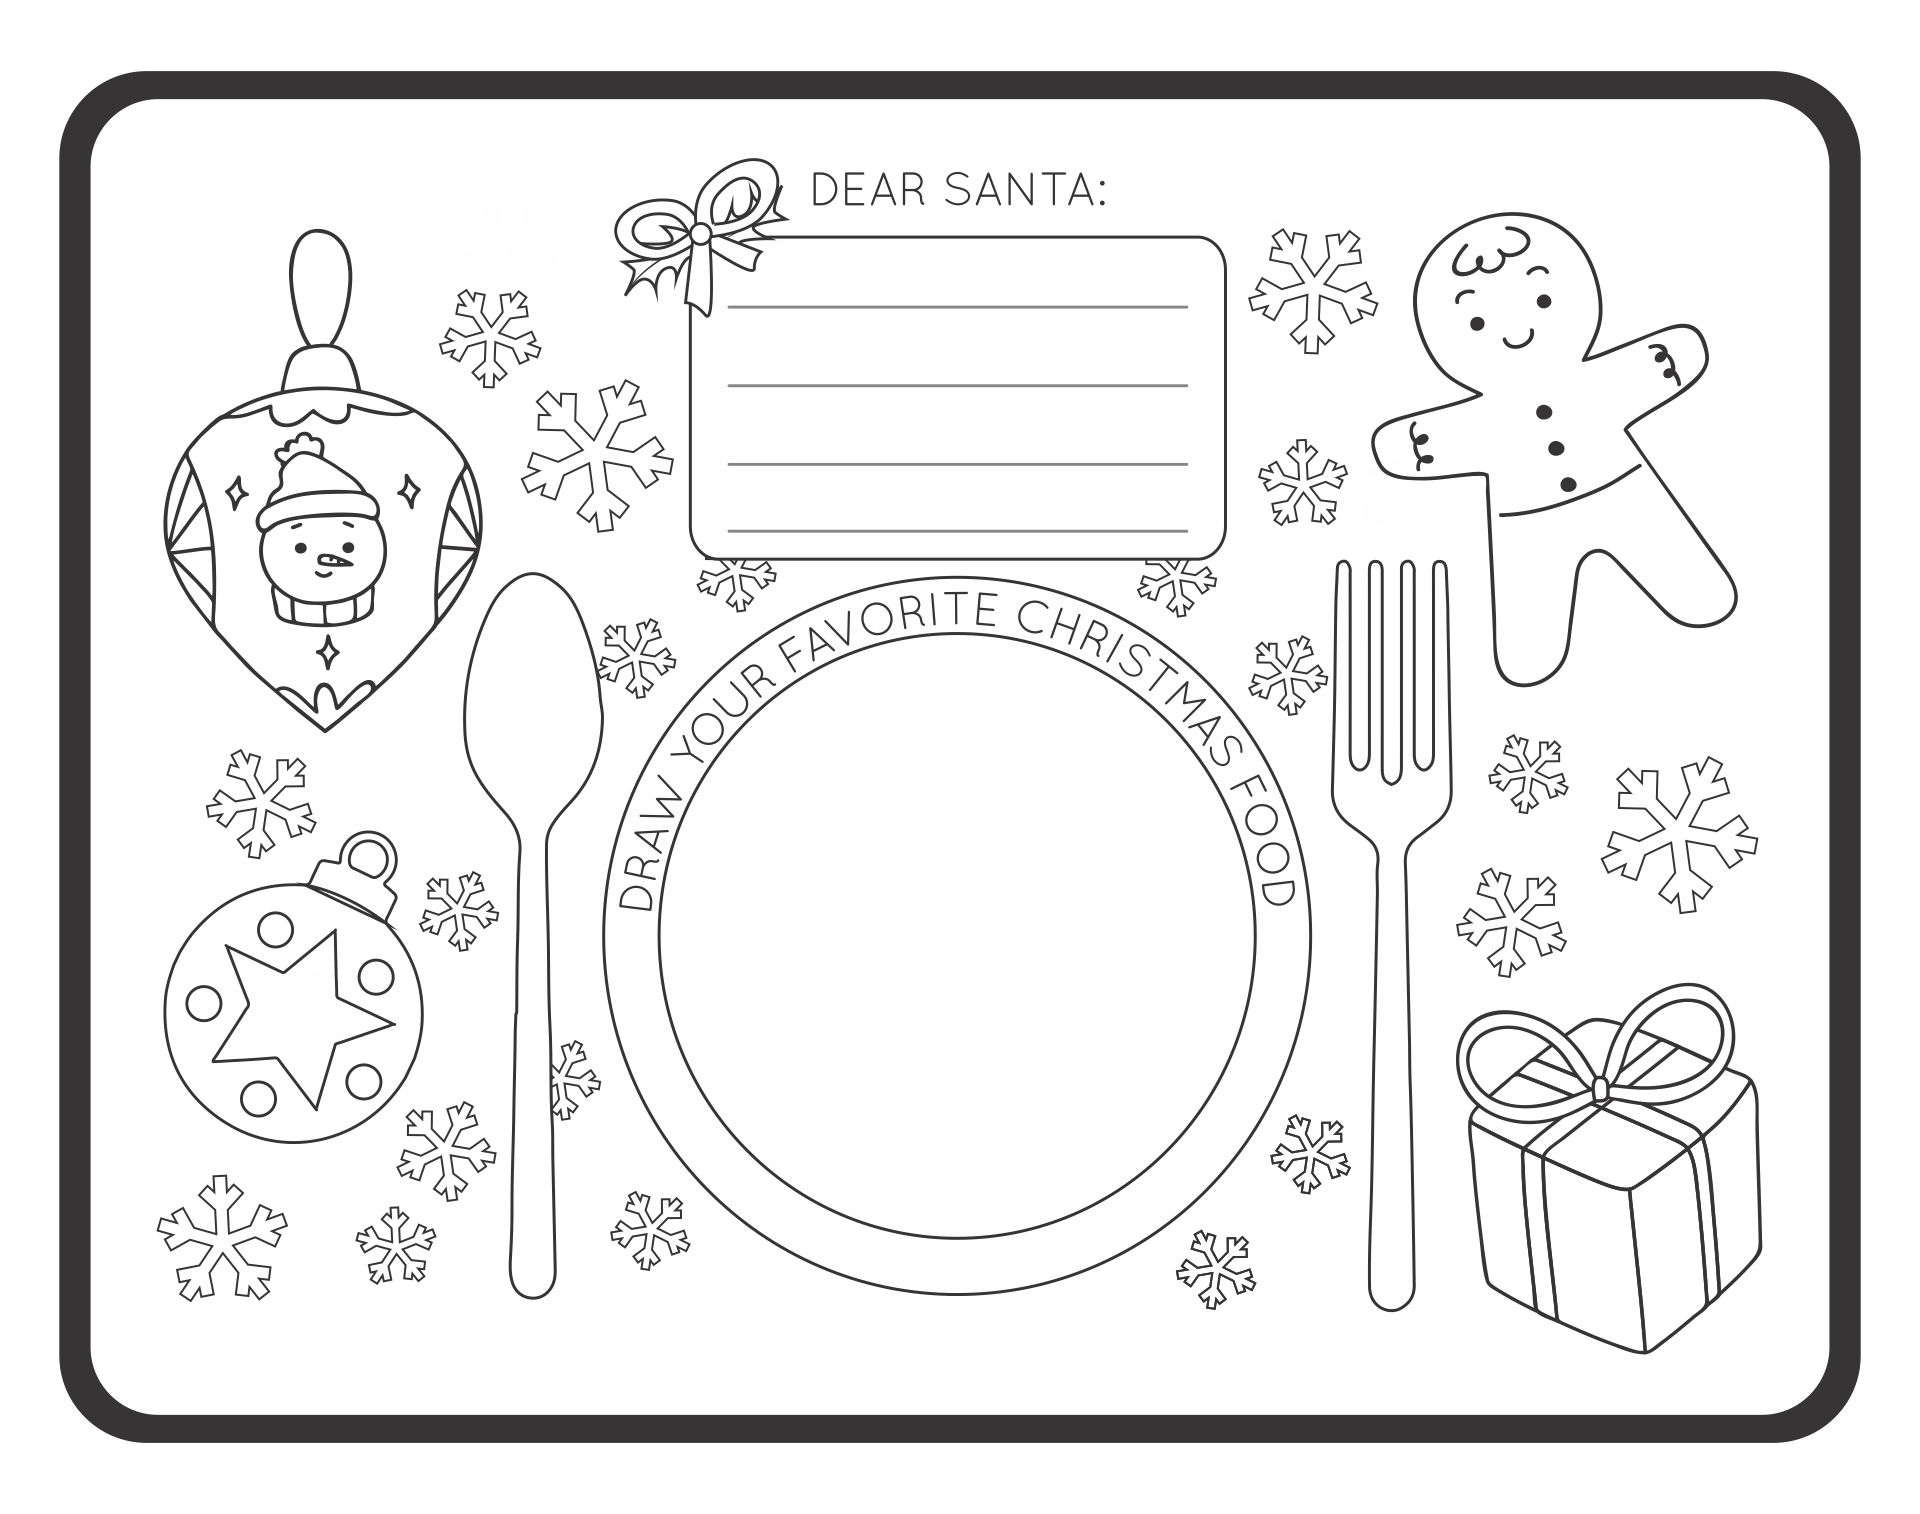 7-best-images-of-printable-placemats-to-color-kids-placemat-template